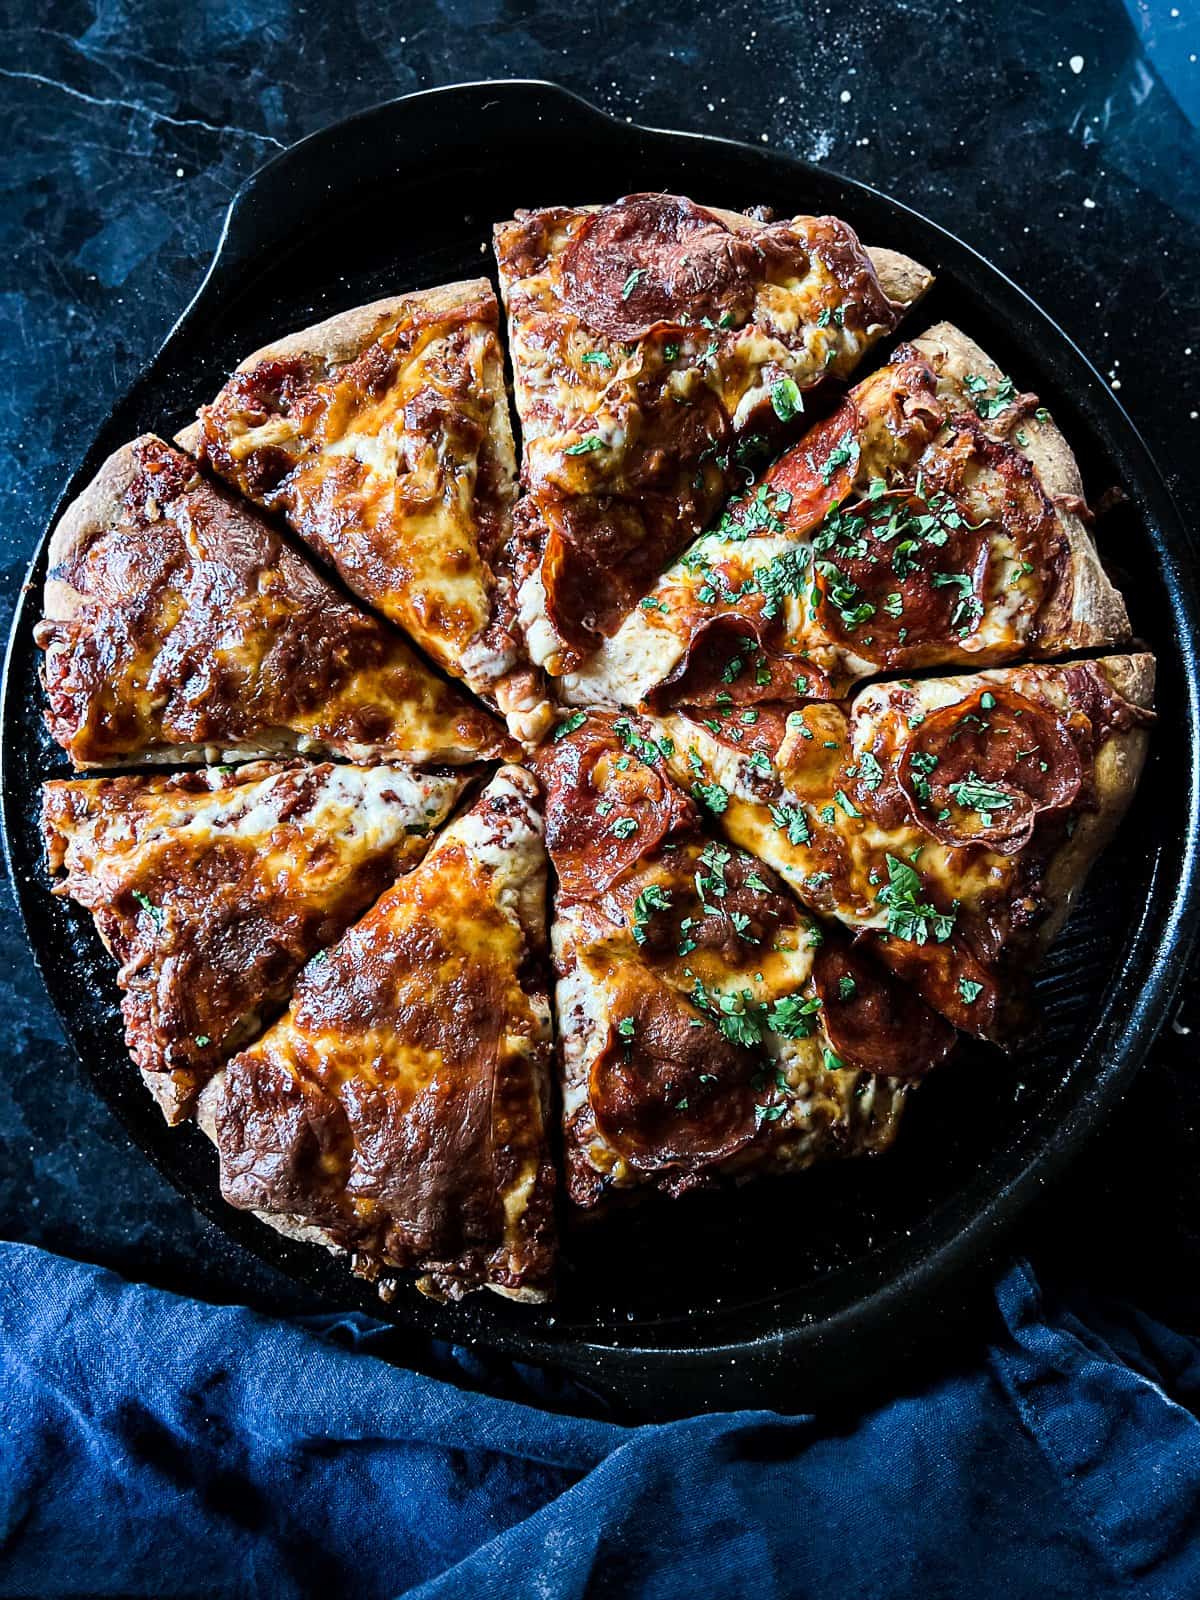 Homemade pizza on pizza stone with crispy crust